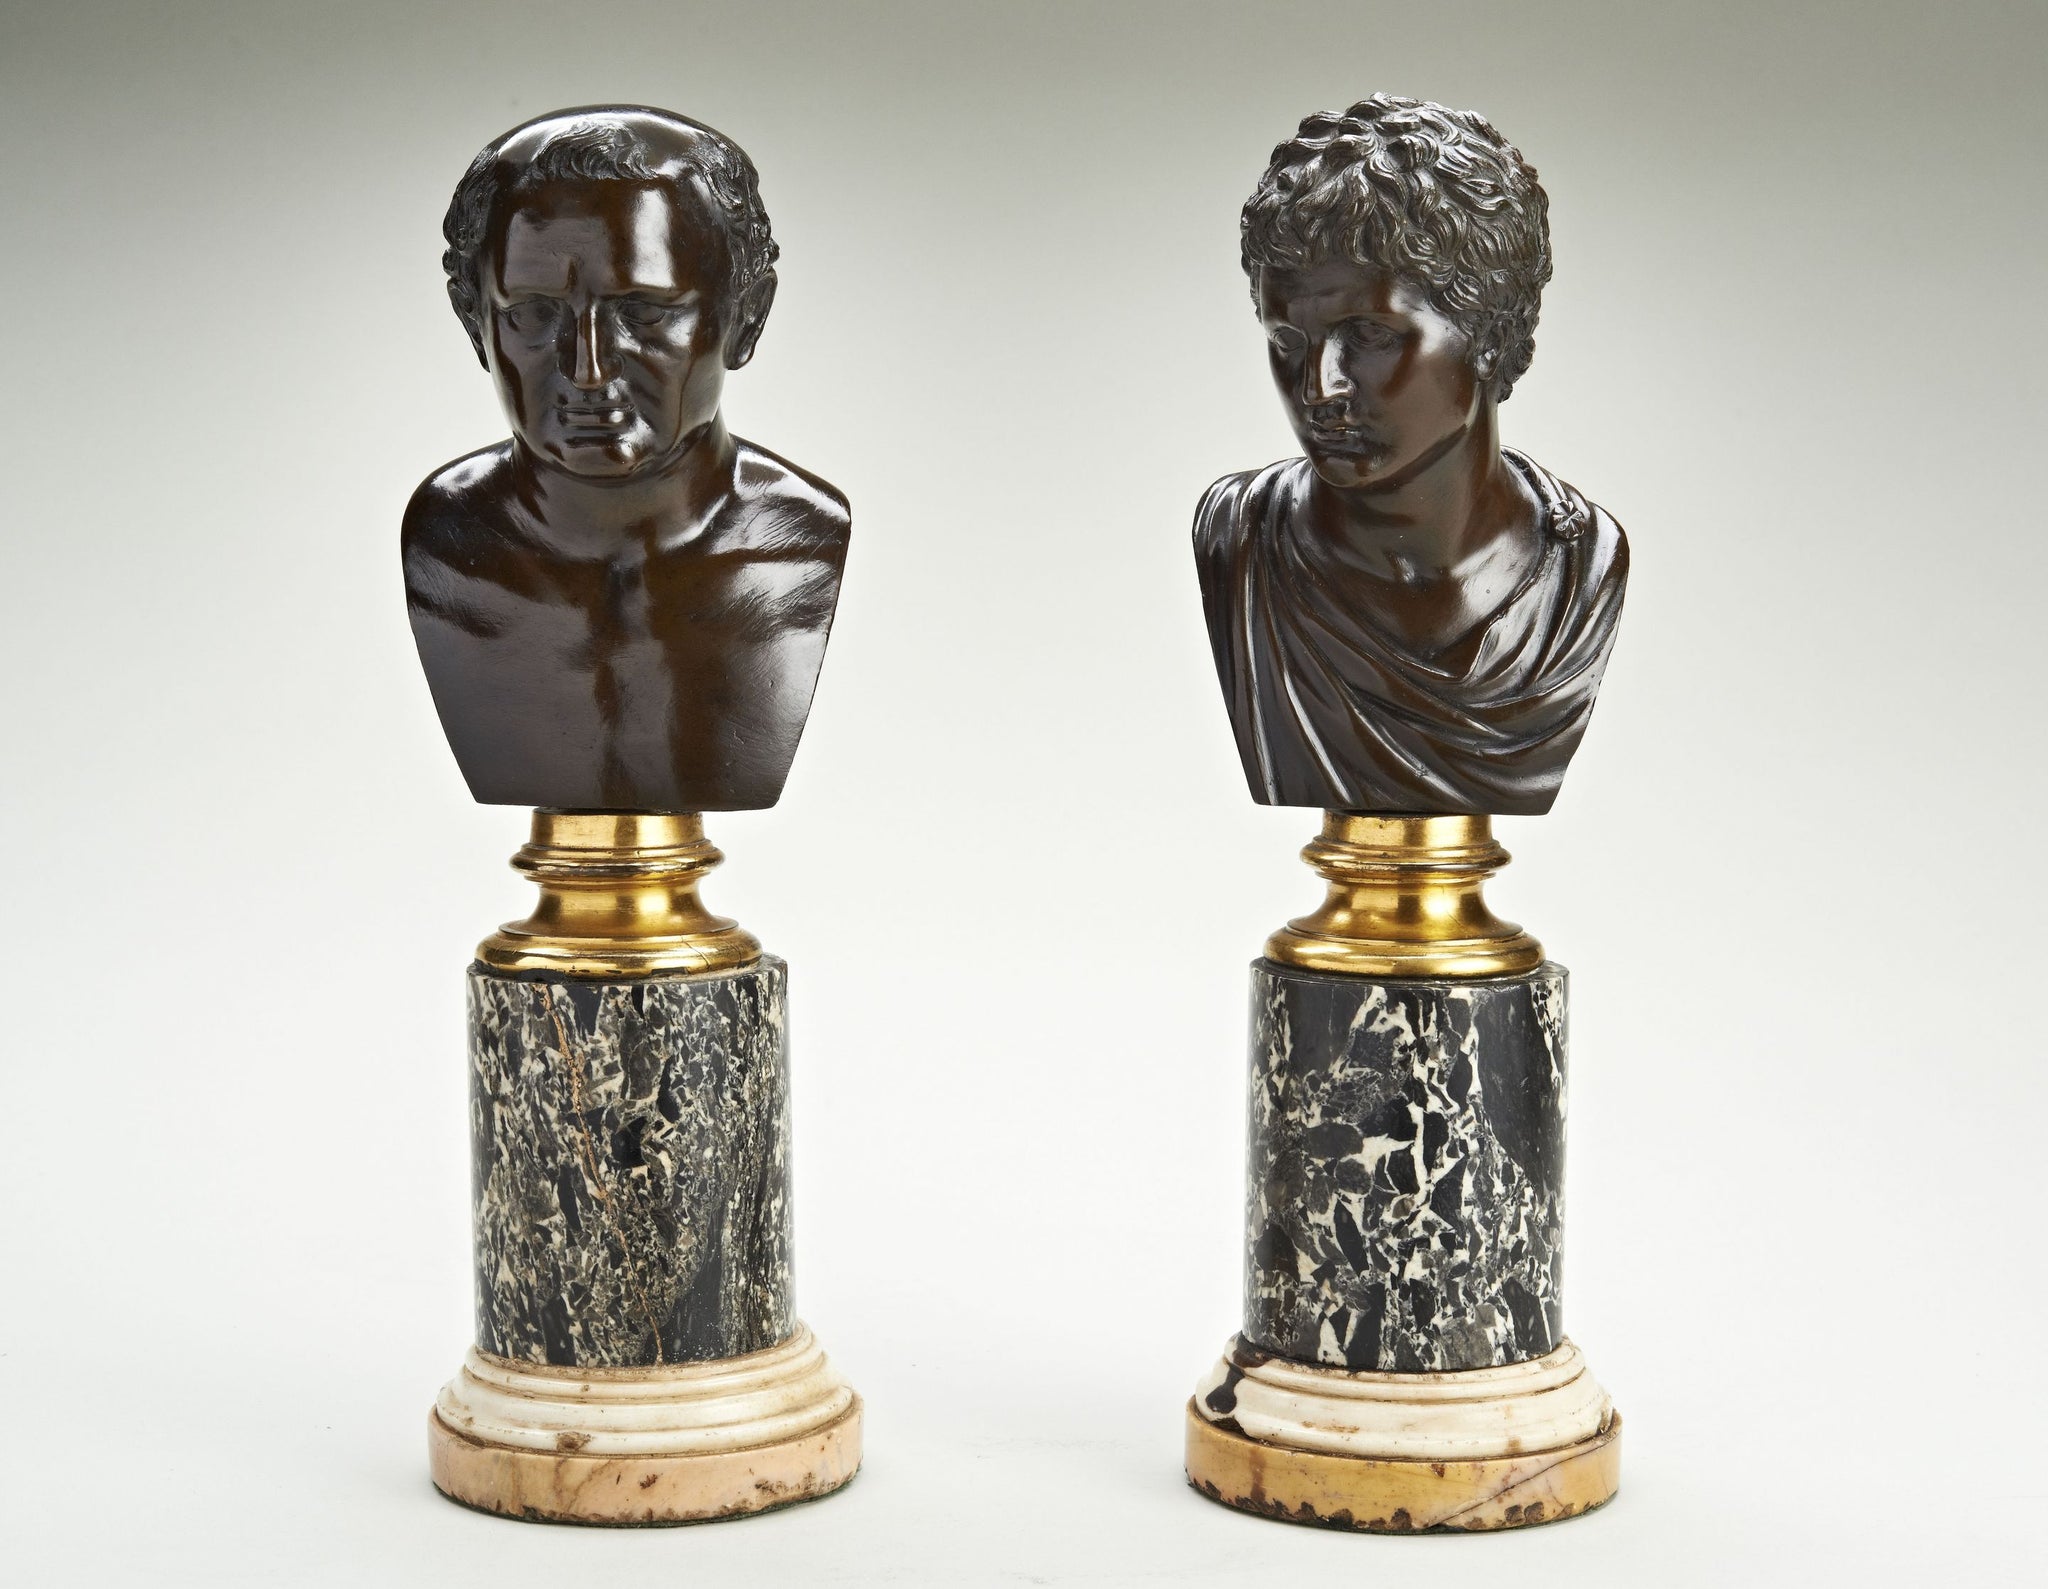 Pair of Grand Tour Bronze Busts of Emperors